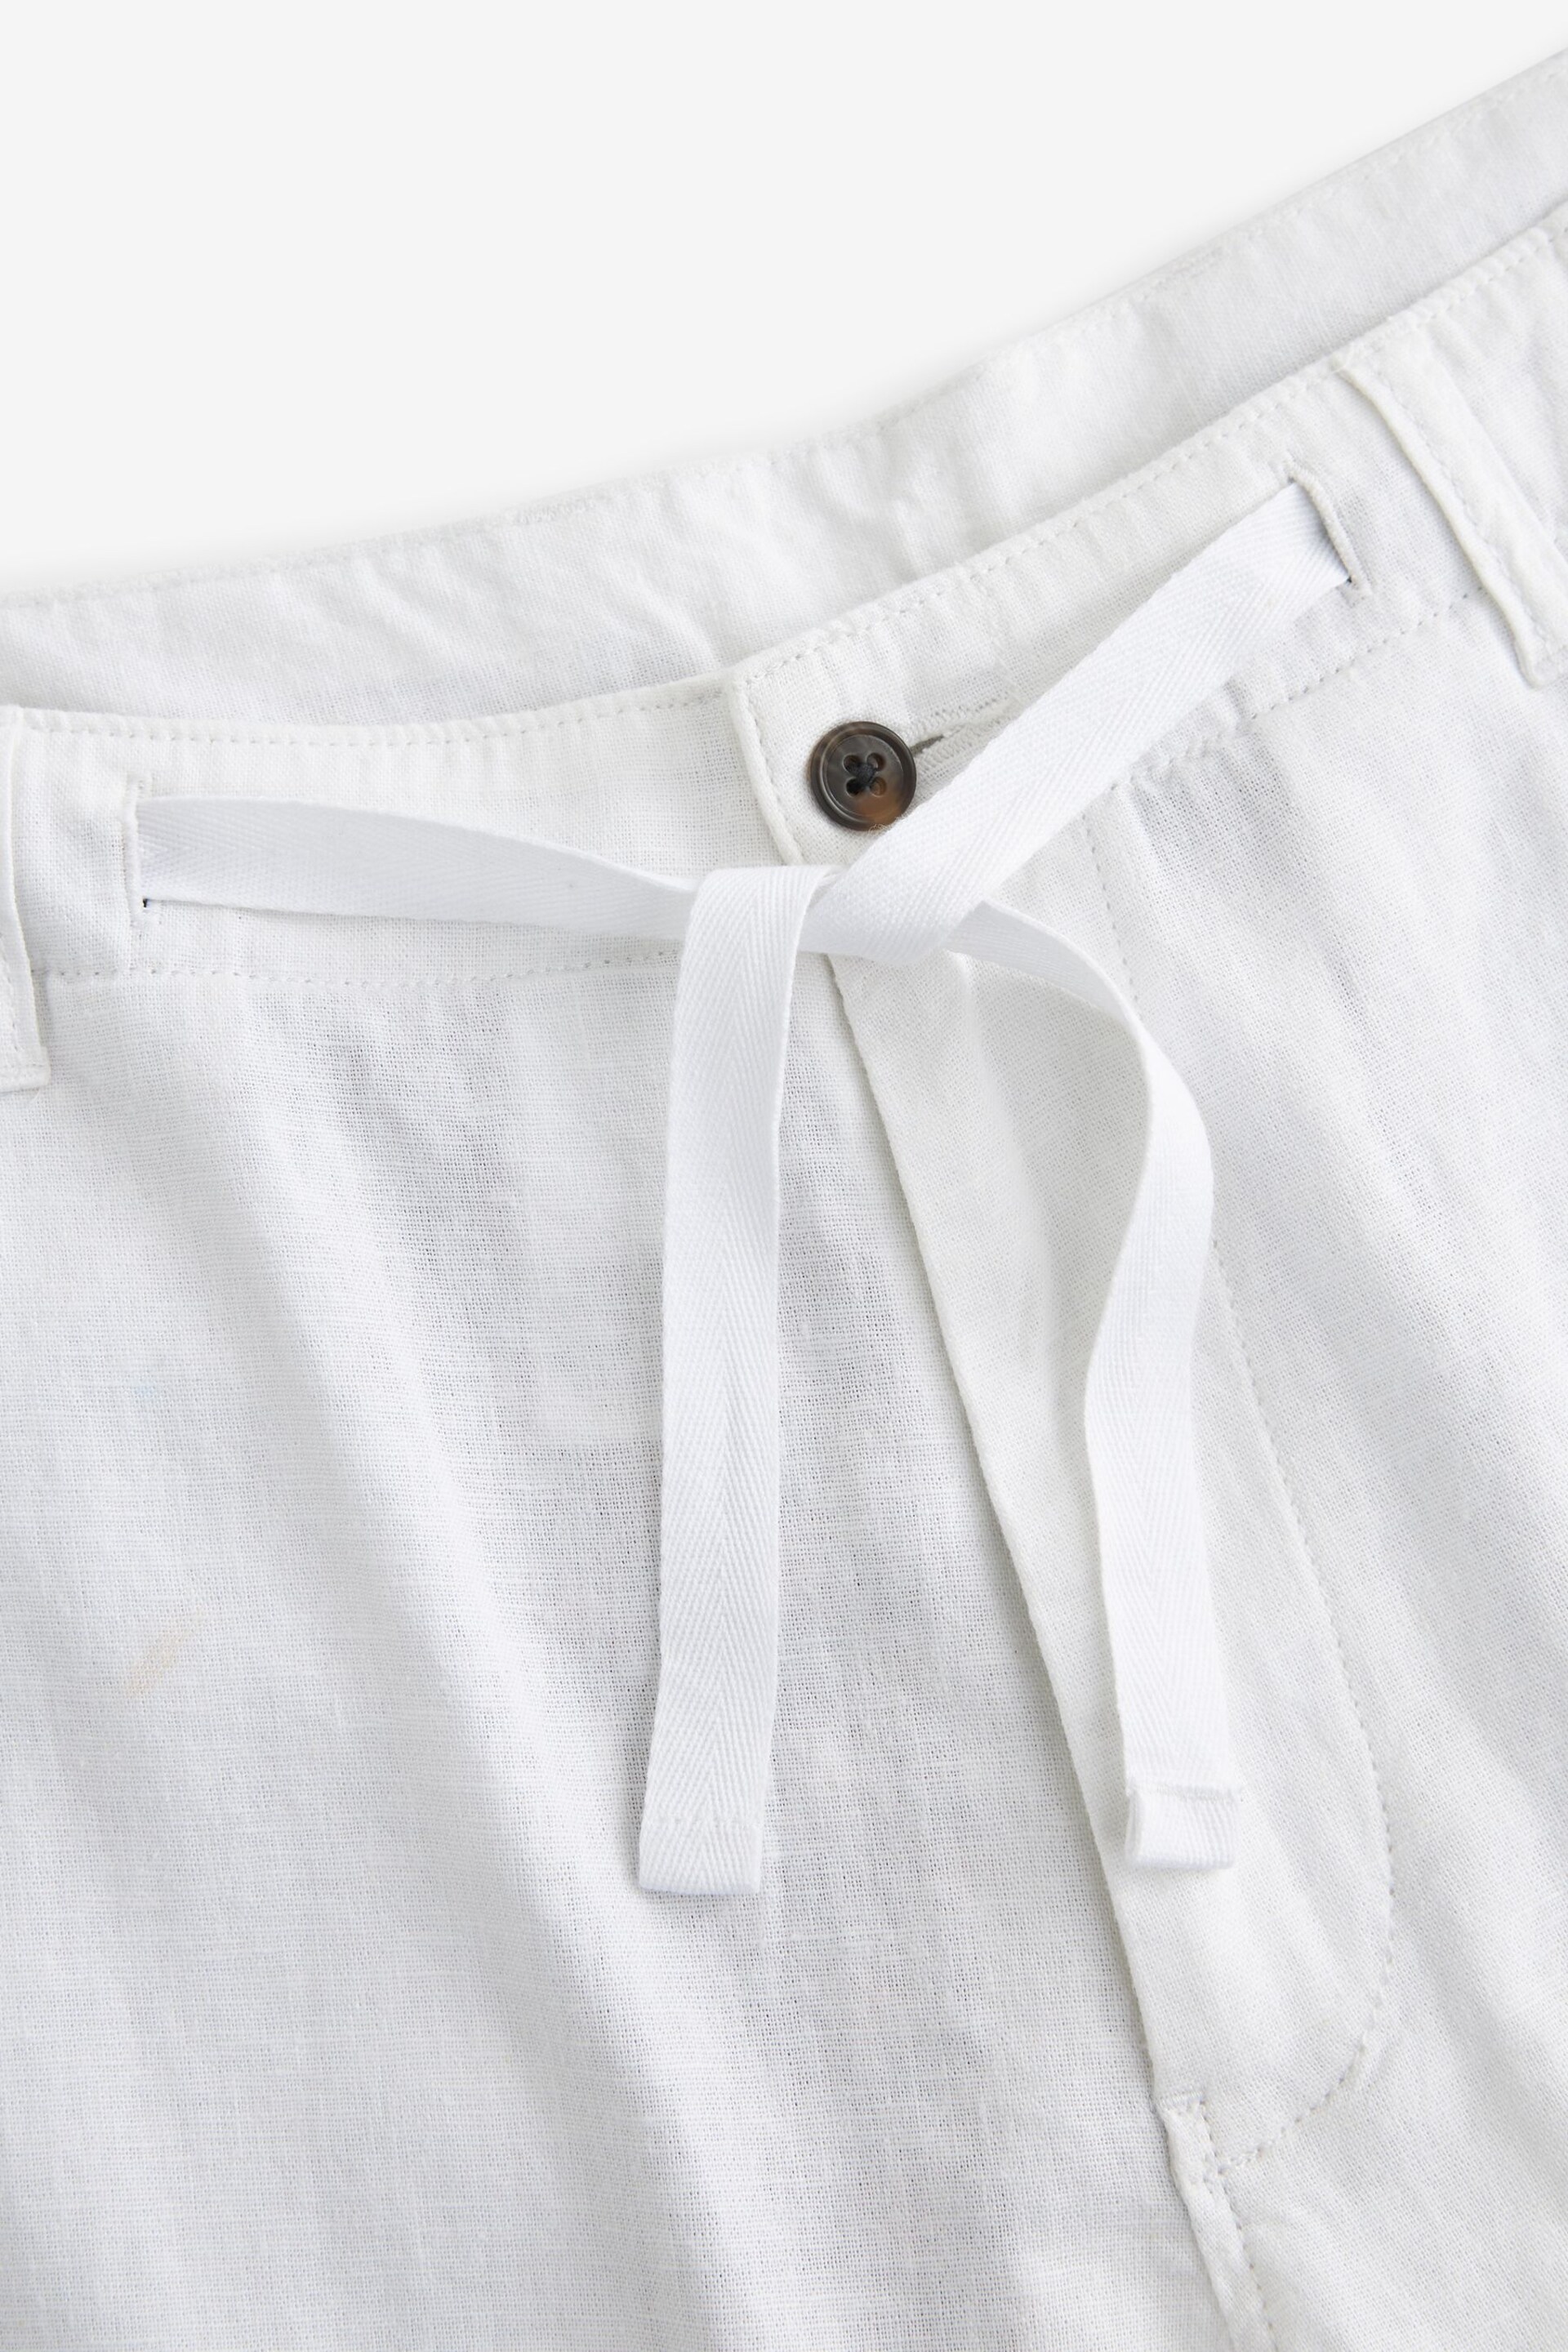 White Linen Viscose Drawstring Trousers - Image 12 of 13